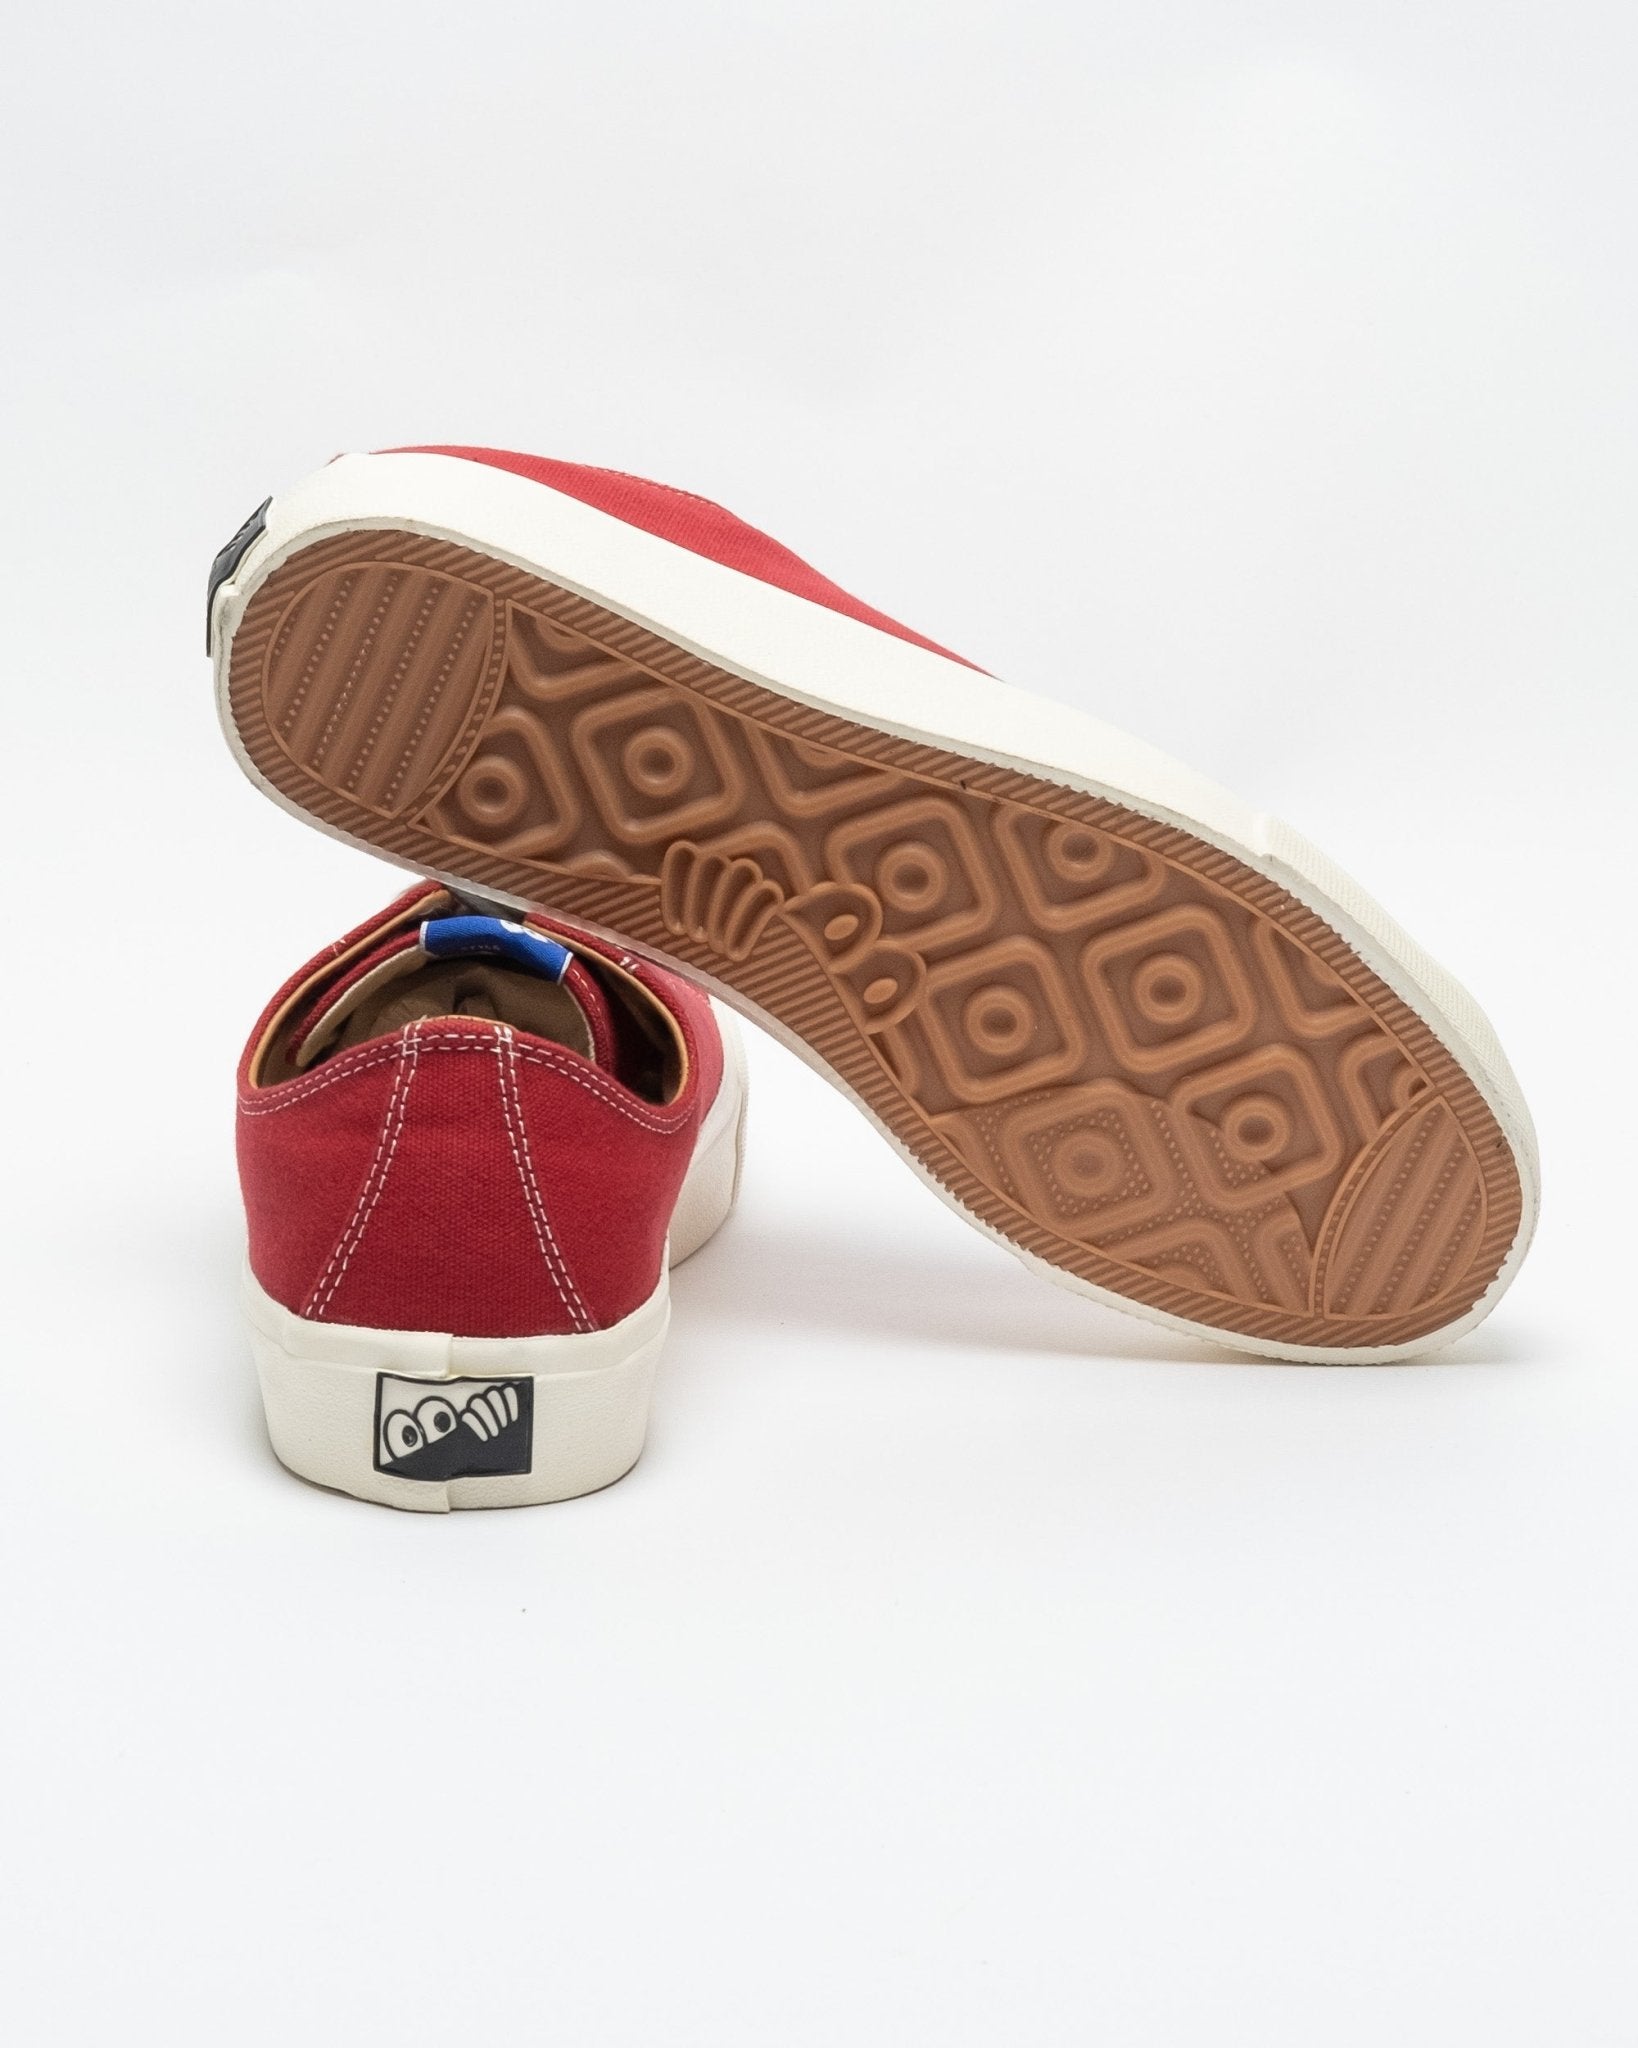 VM003-Canvas LO Classic Red/White - Meadow